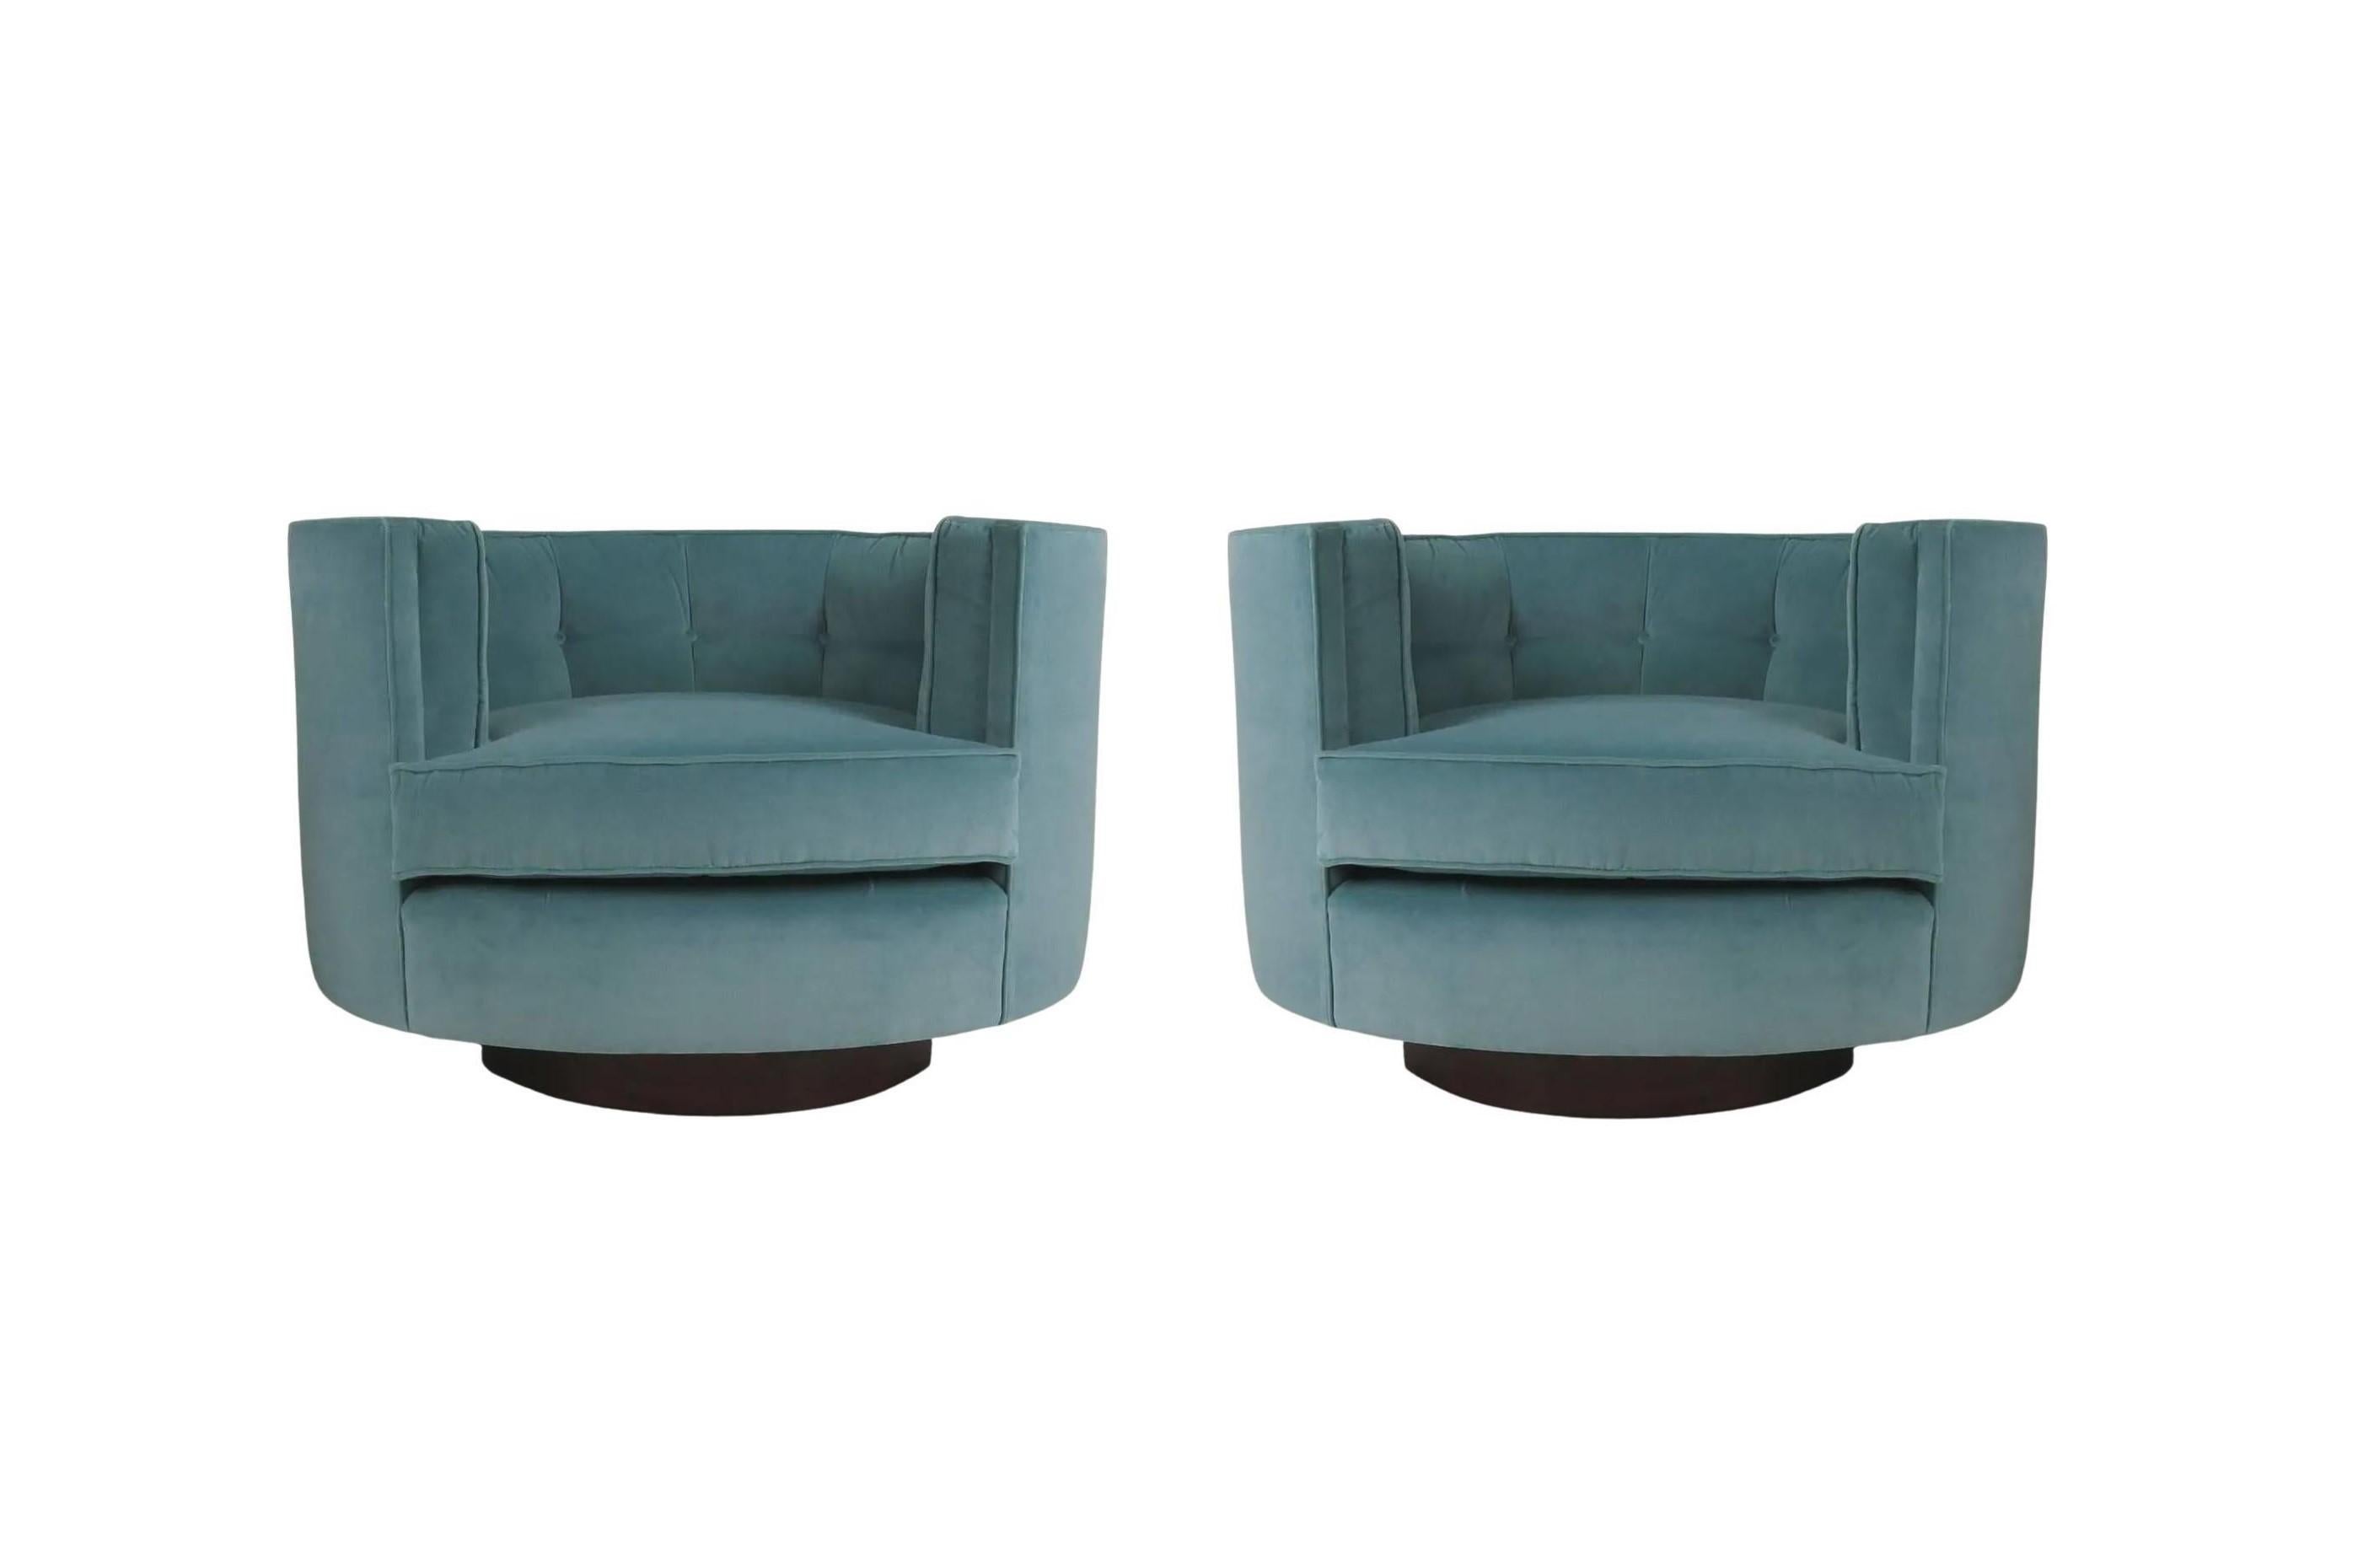 An exemplary and very rare pair of Flair tub swivel chairs in style of Milo Baughman, circa 1970s. His signature style, defined by clean lines and architectural simplicity, expresses an acute awareness of the evolution of design. Swivel chairs have